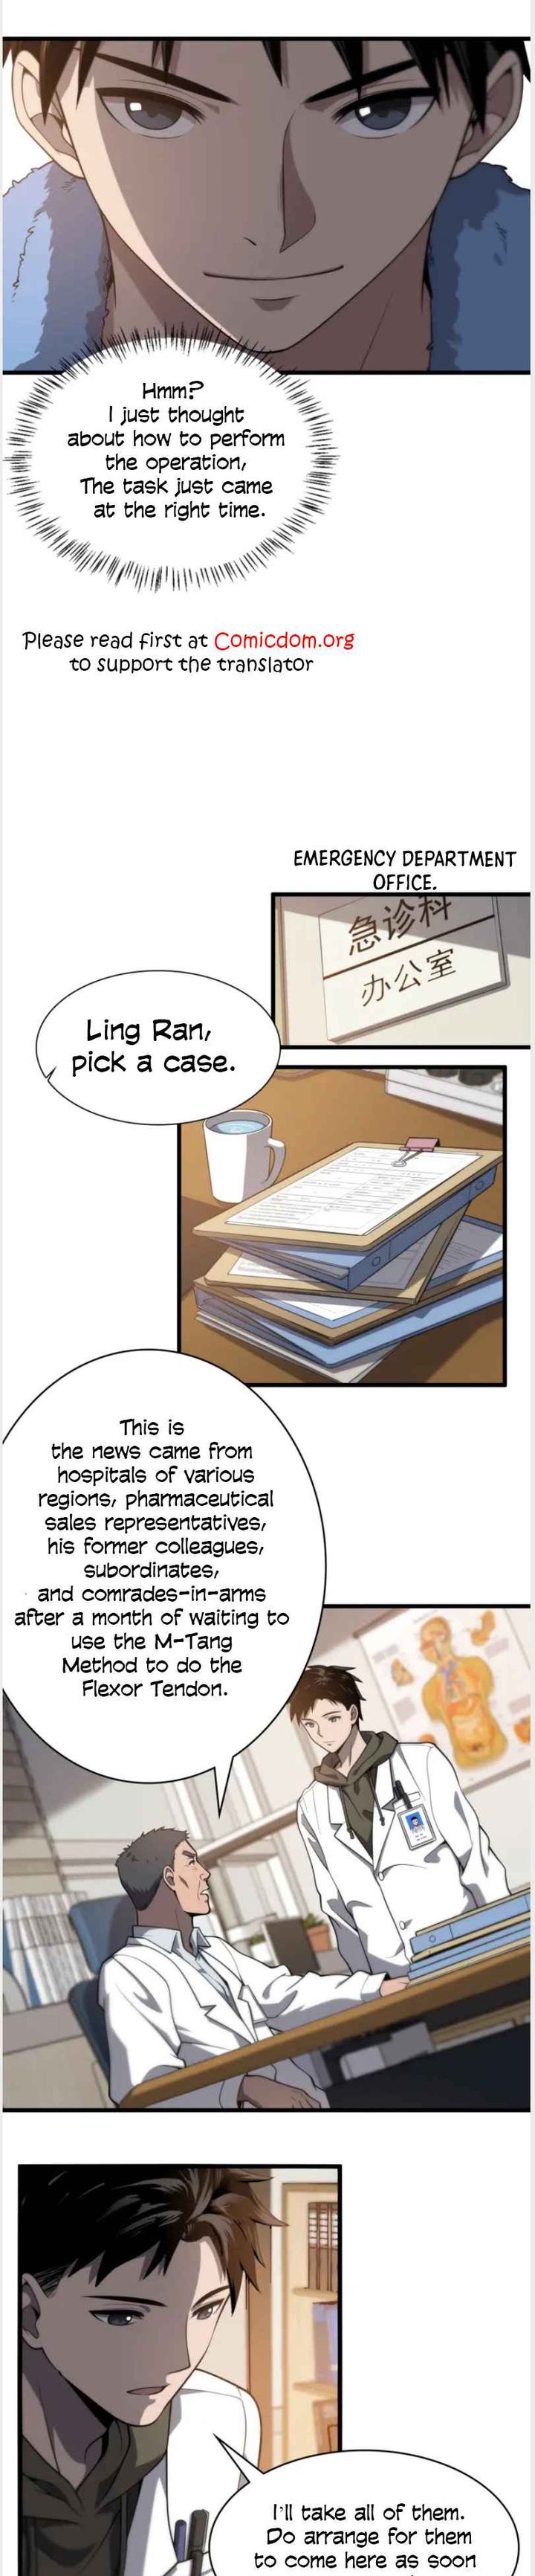 great_doctor_ling_ran_31_5